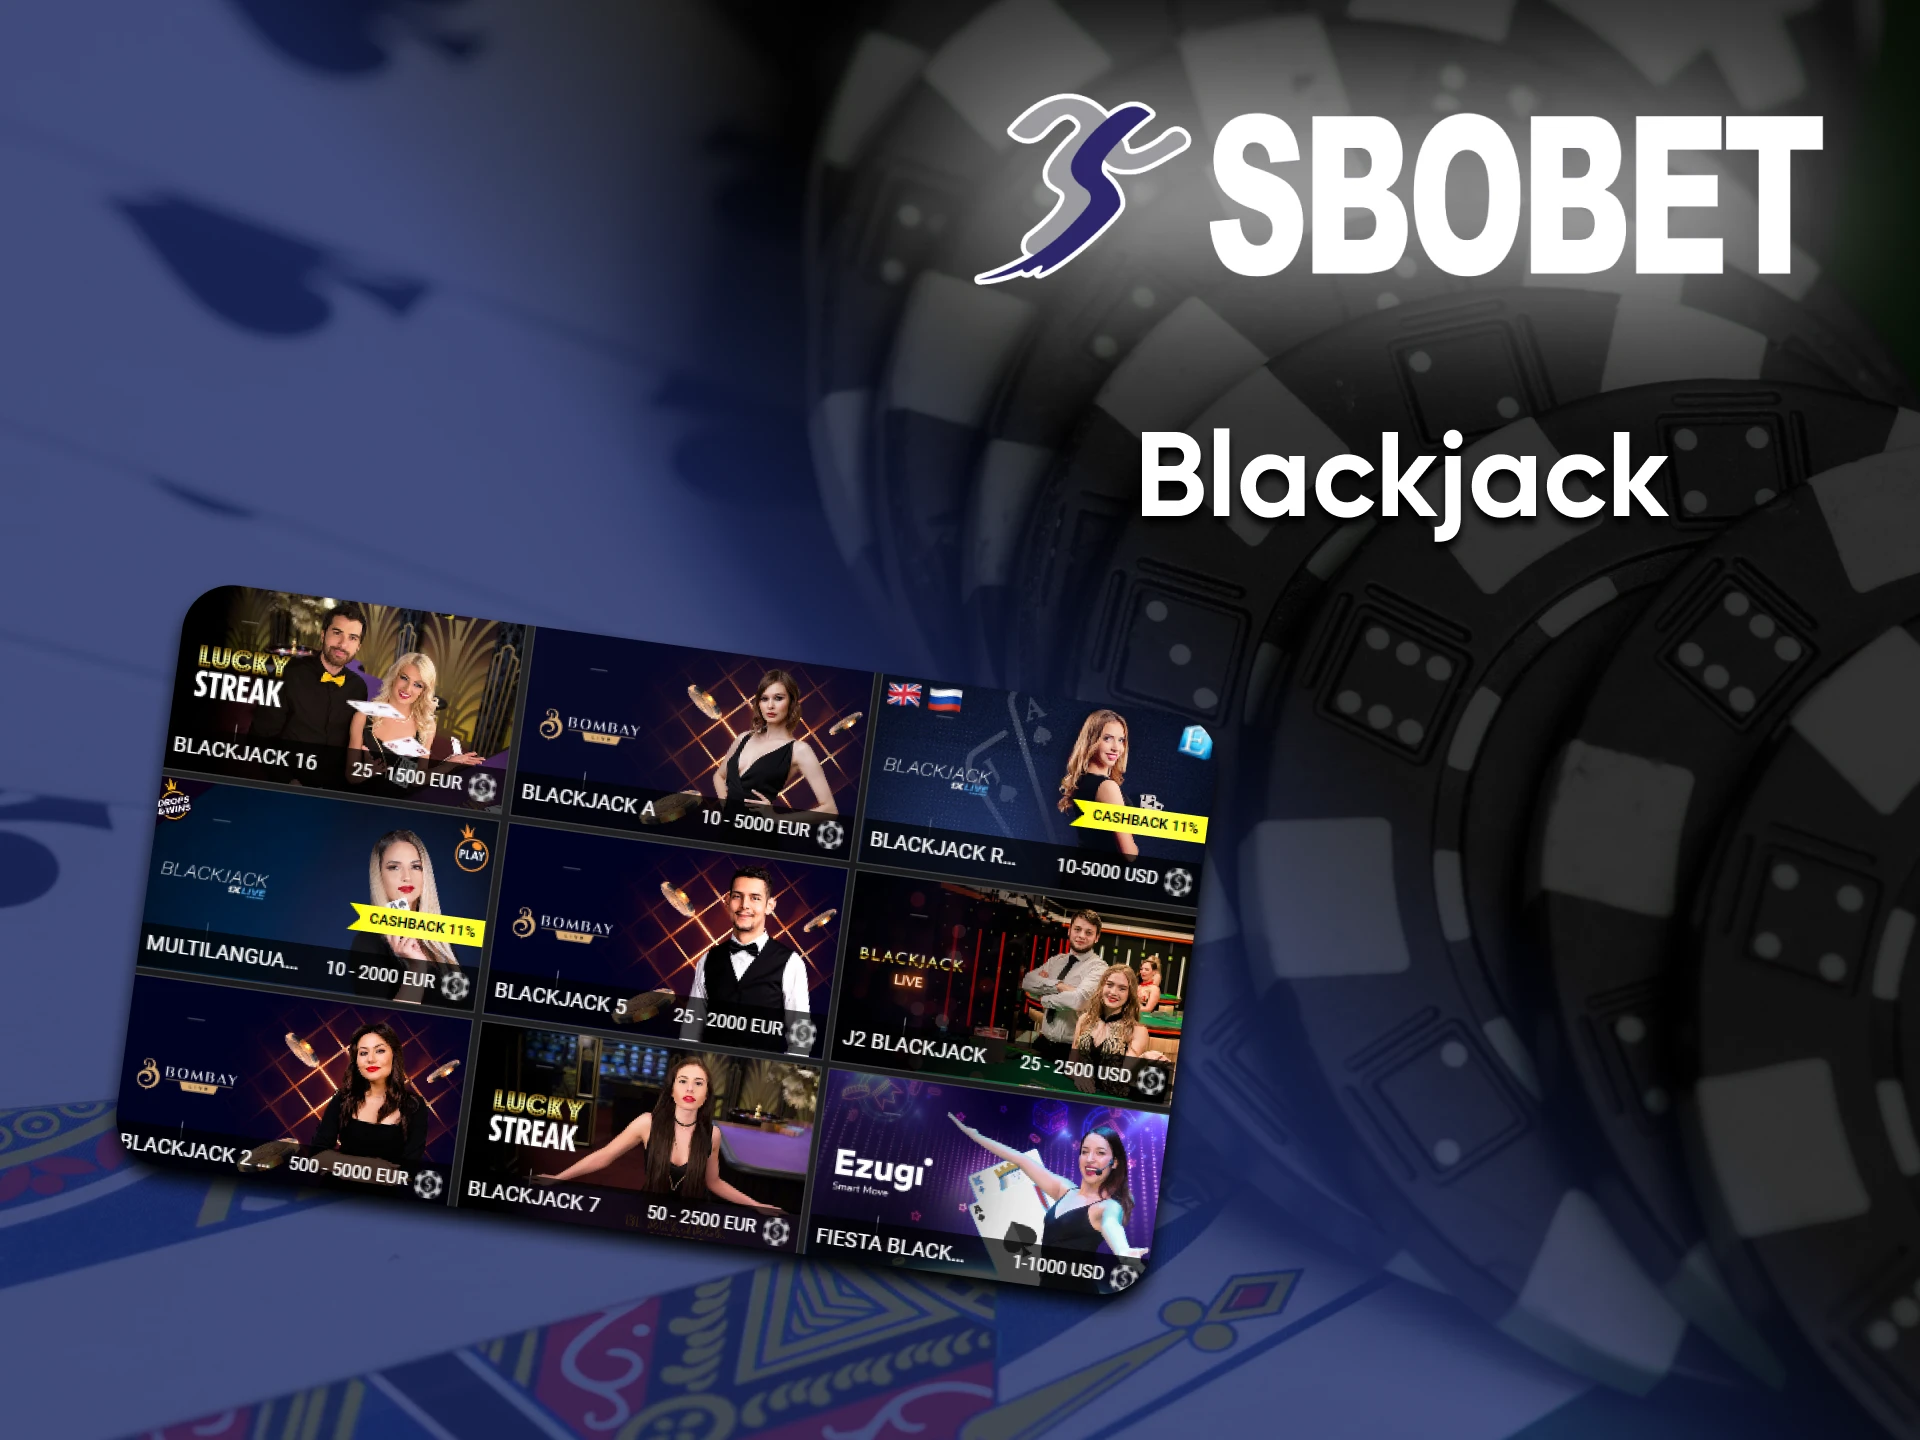 On the Sbobet site, you can play games like Blackjack.